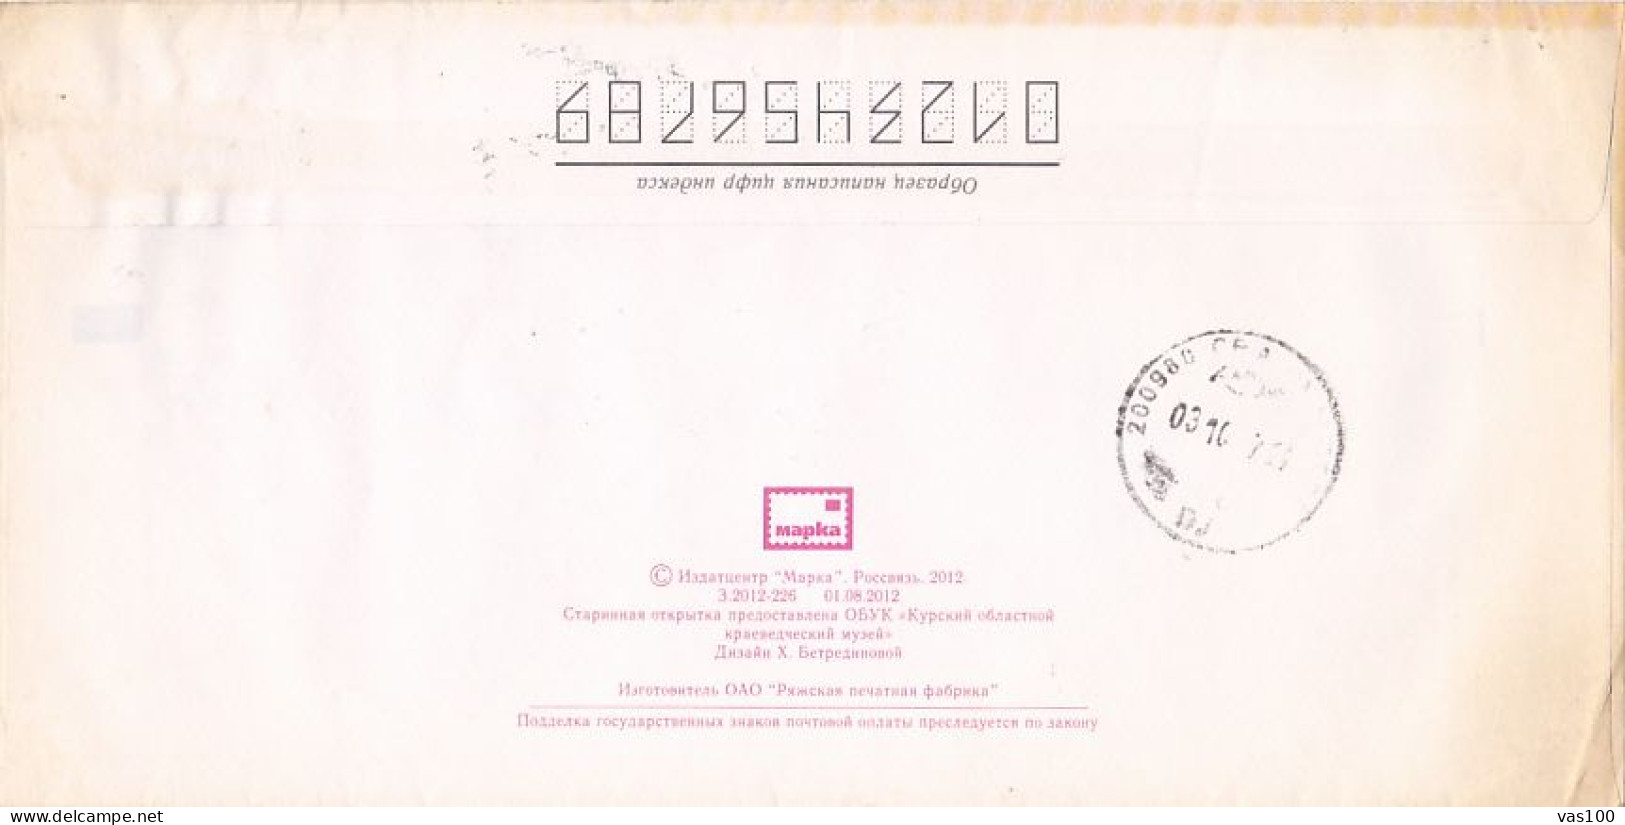 KURSK TOWN, OLD VIEW, COVER STATIONERY, ENTIER POSTAL, 2012, RUSSIA - Interi Postali